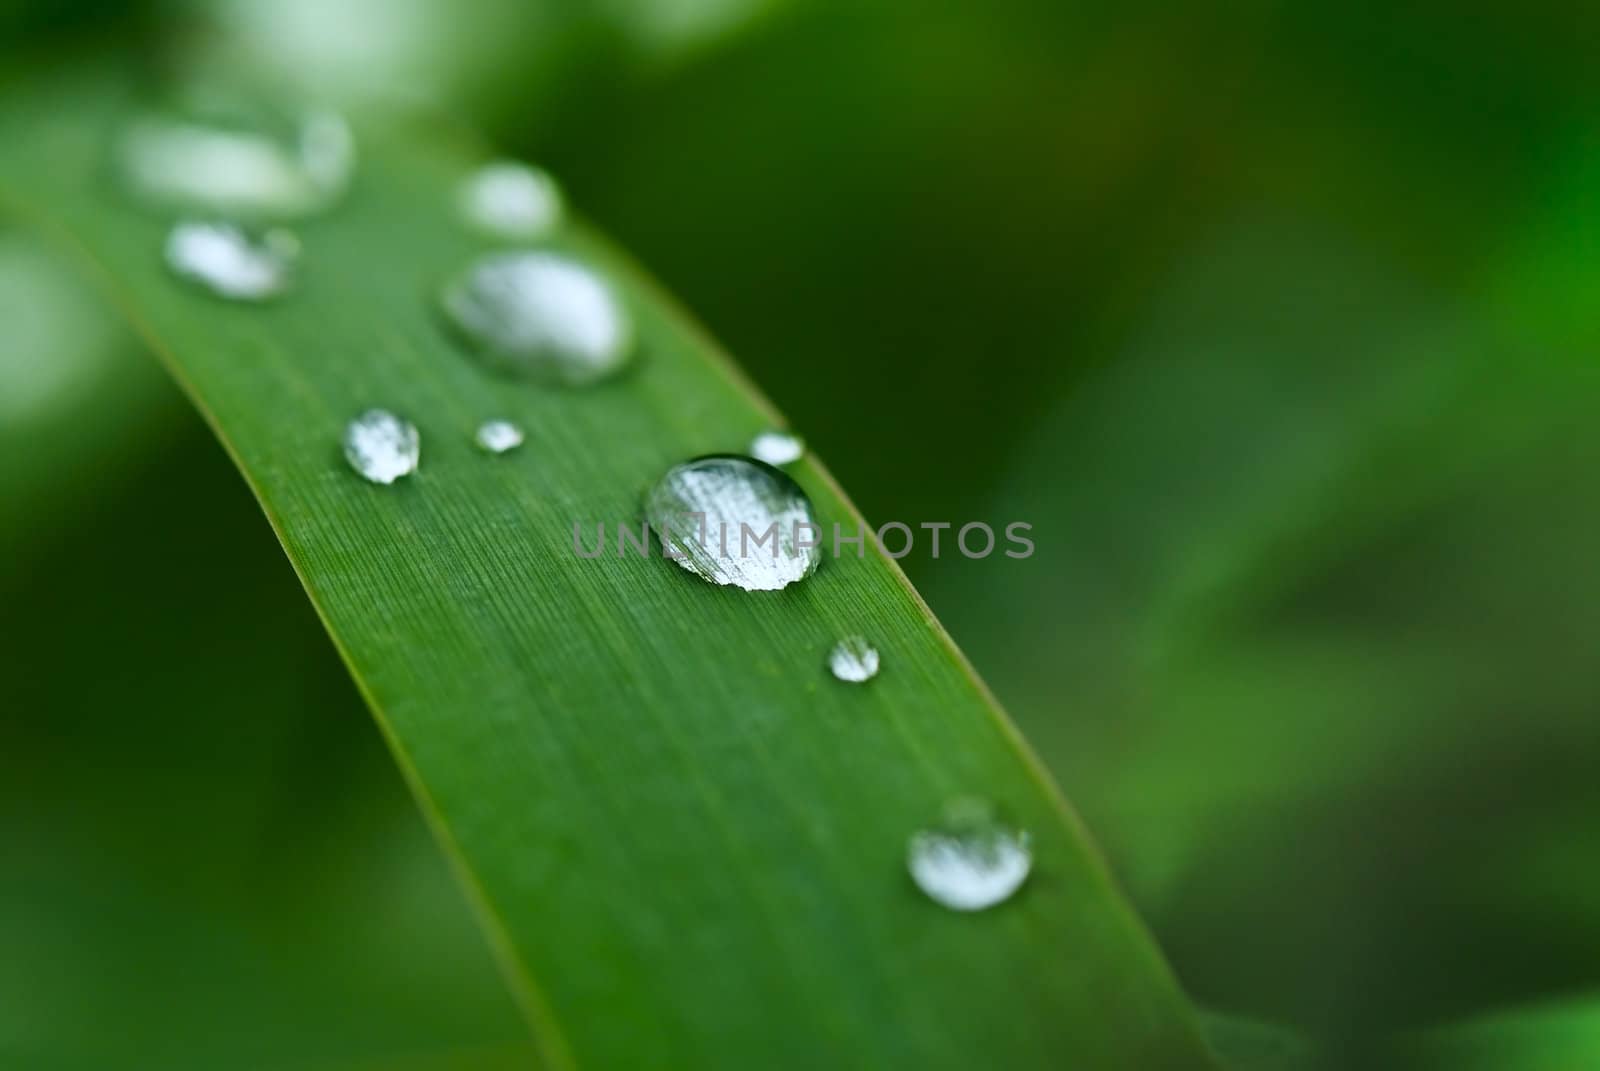 Water Droplet on the blade of grass